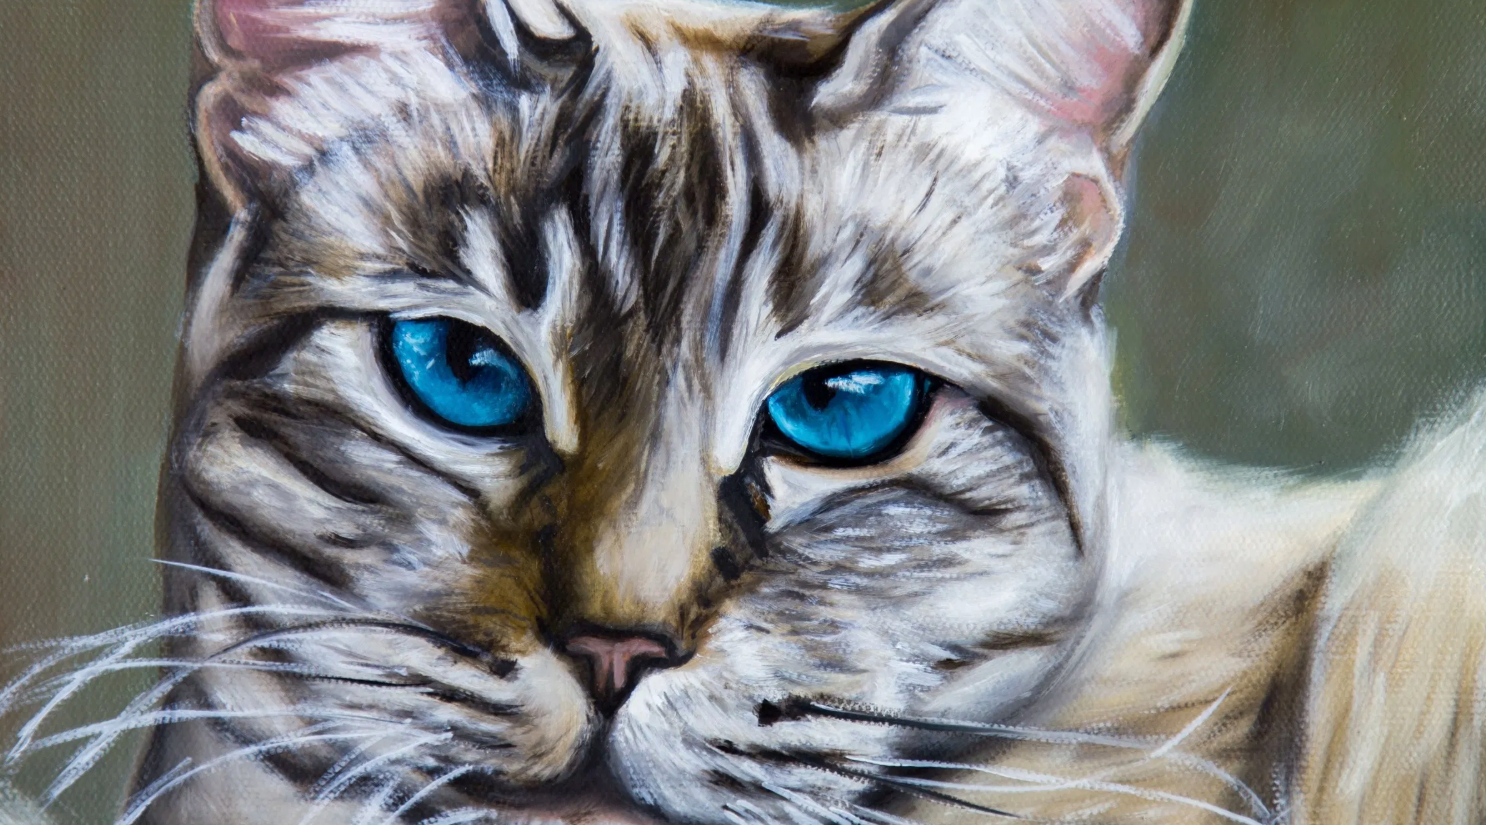 painting of a cat